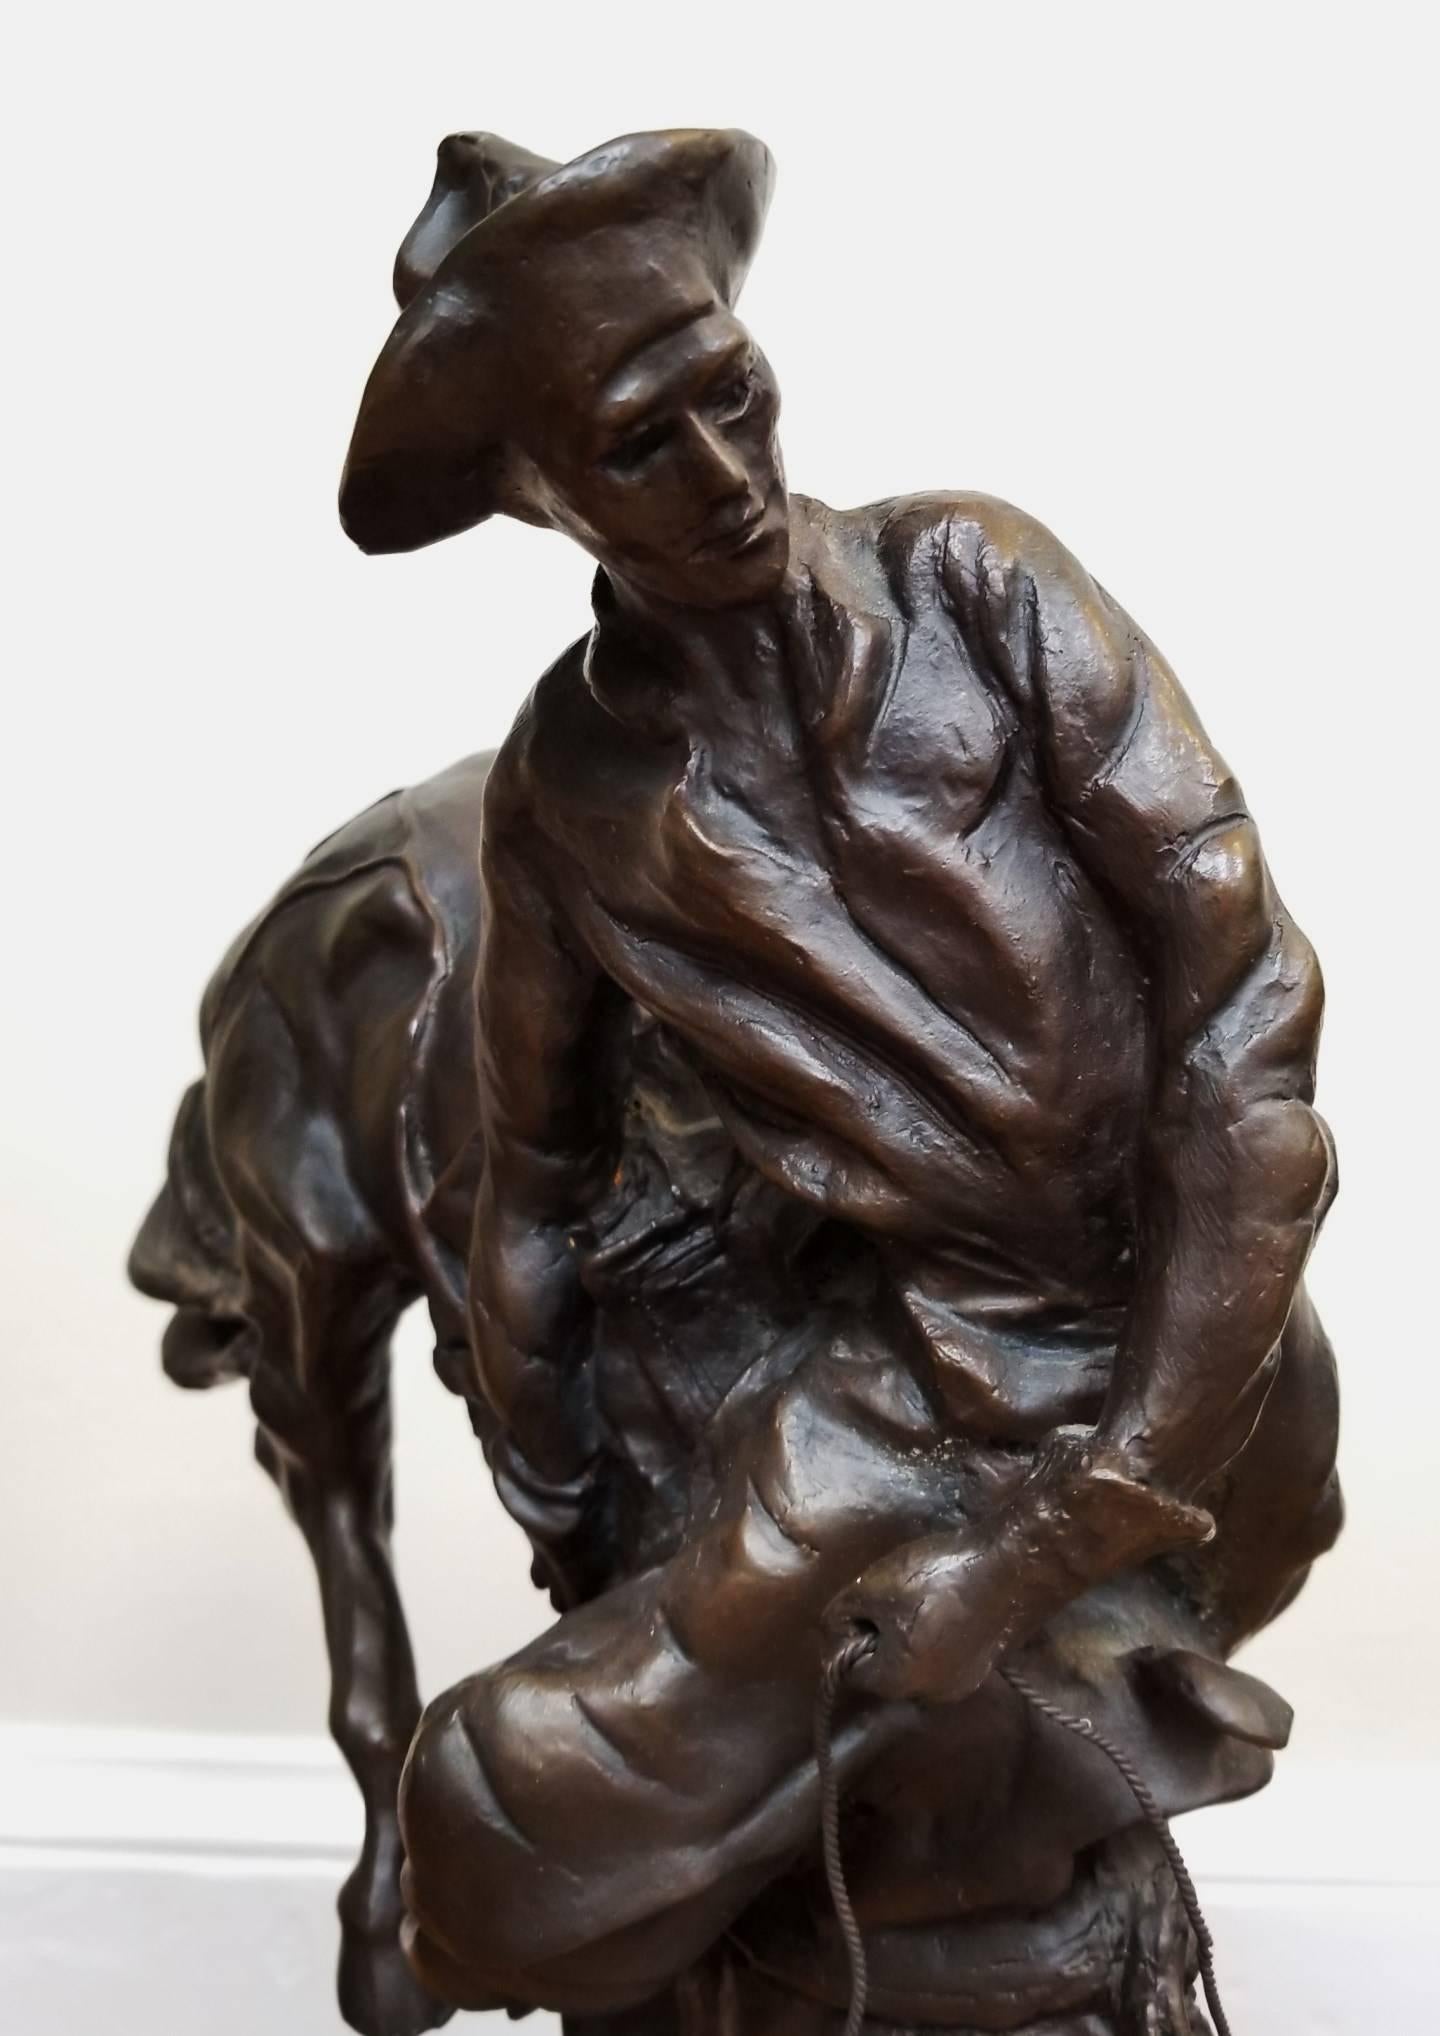 The Outlaw - Sculpture by (after) Frederic Remington